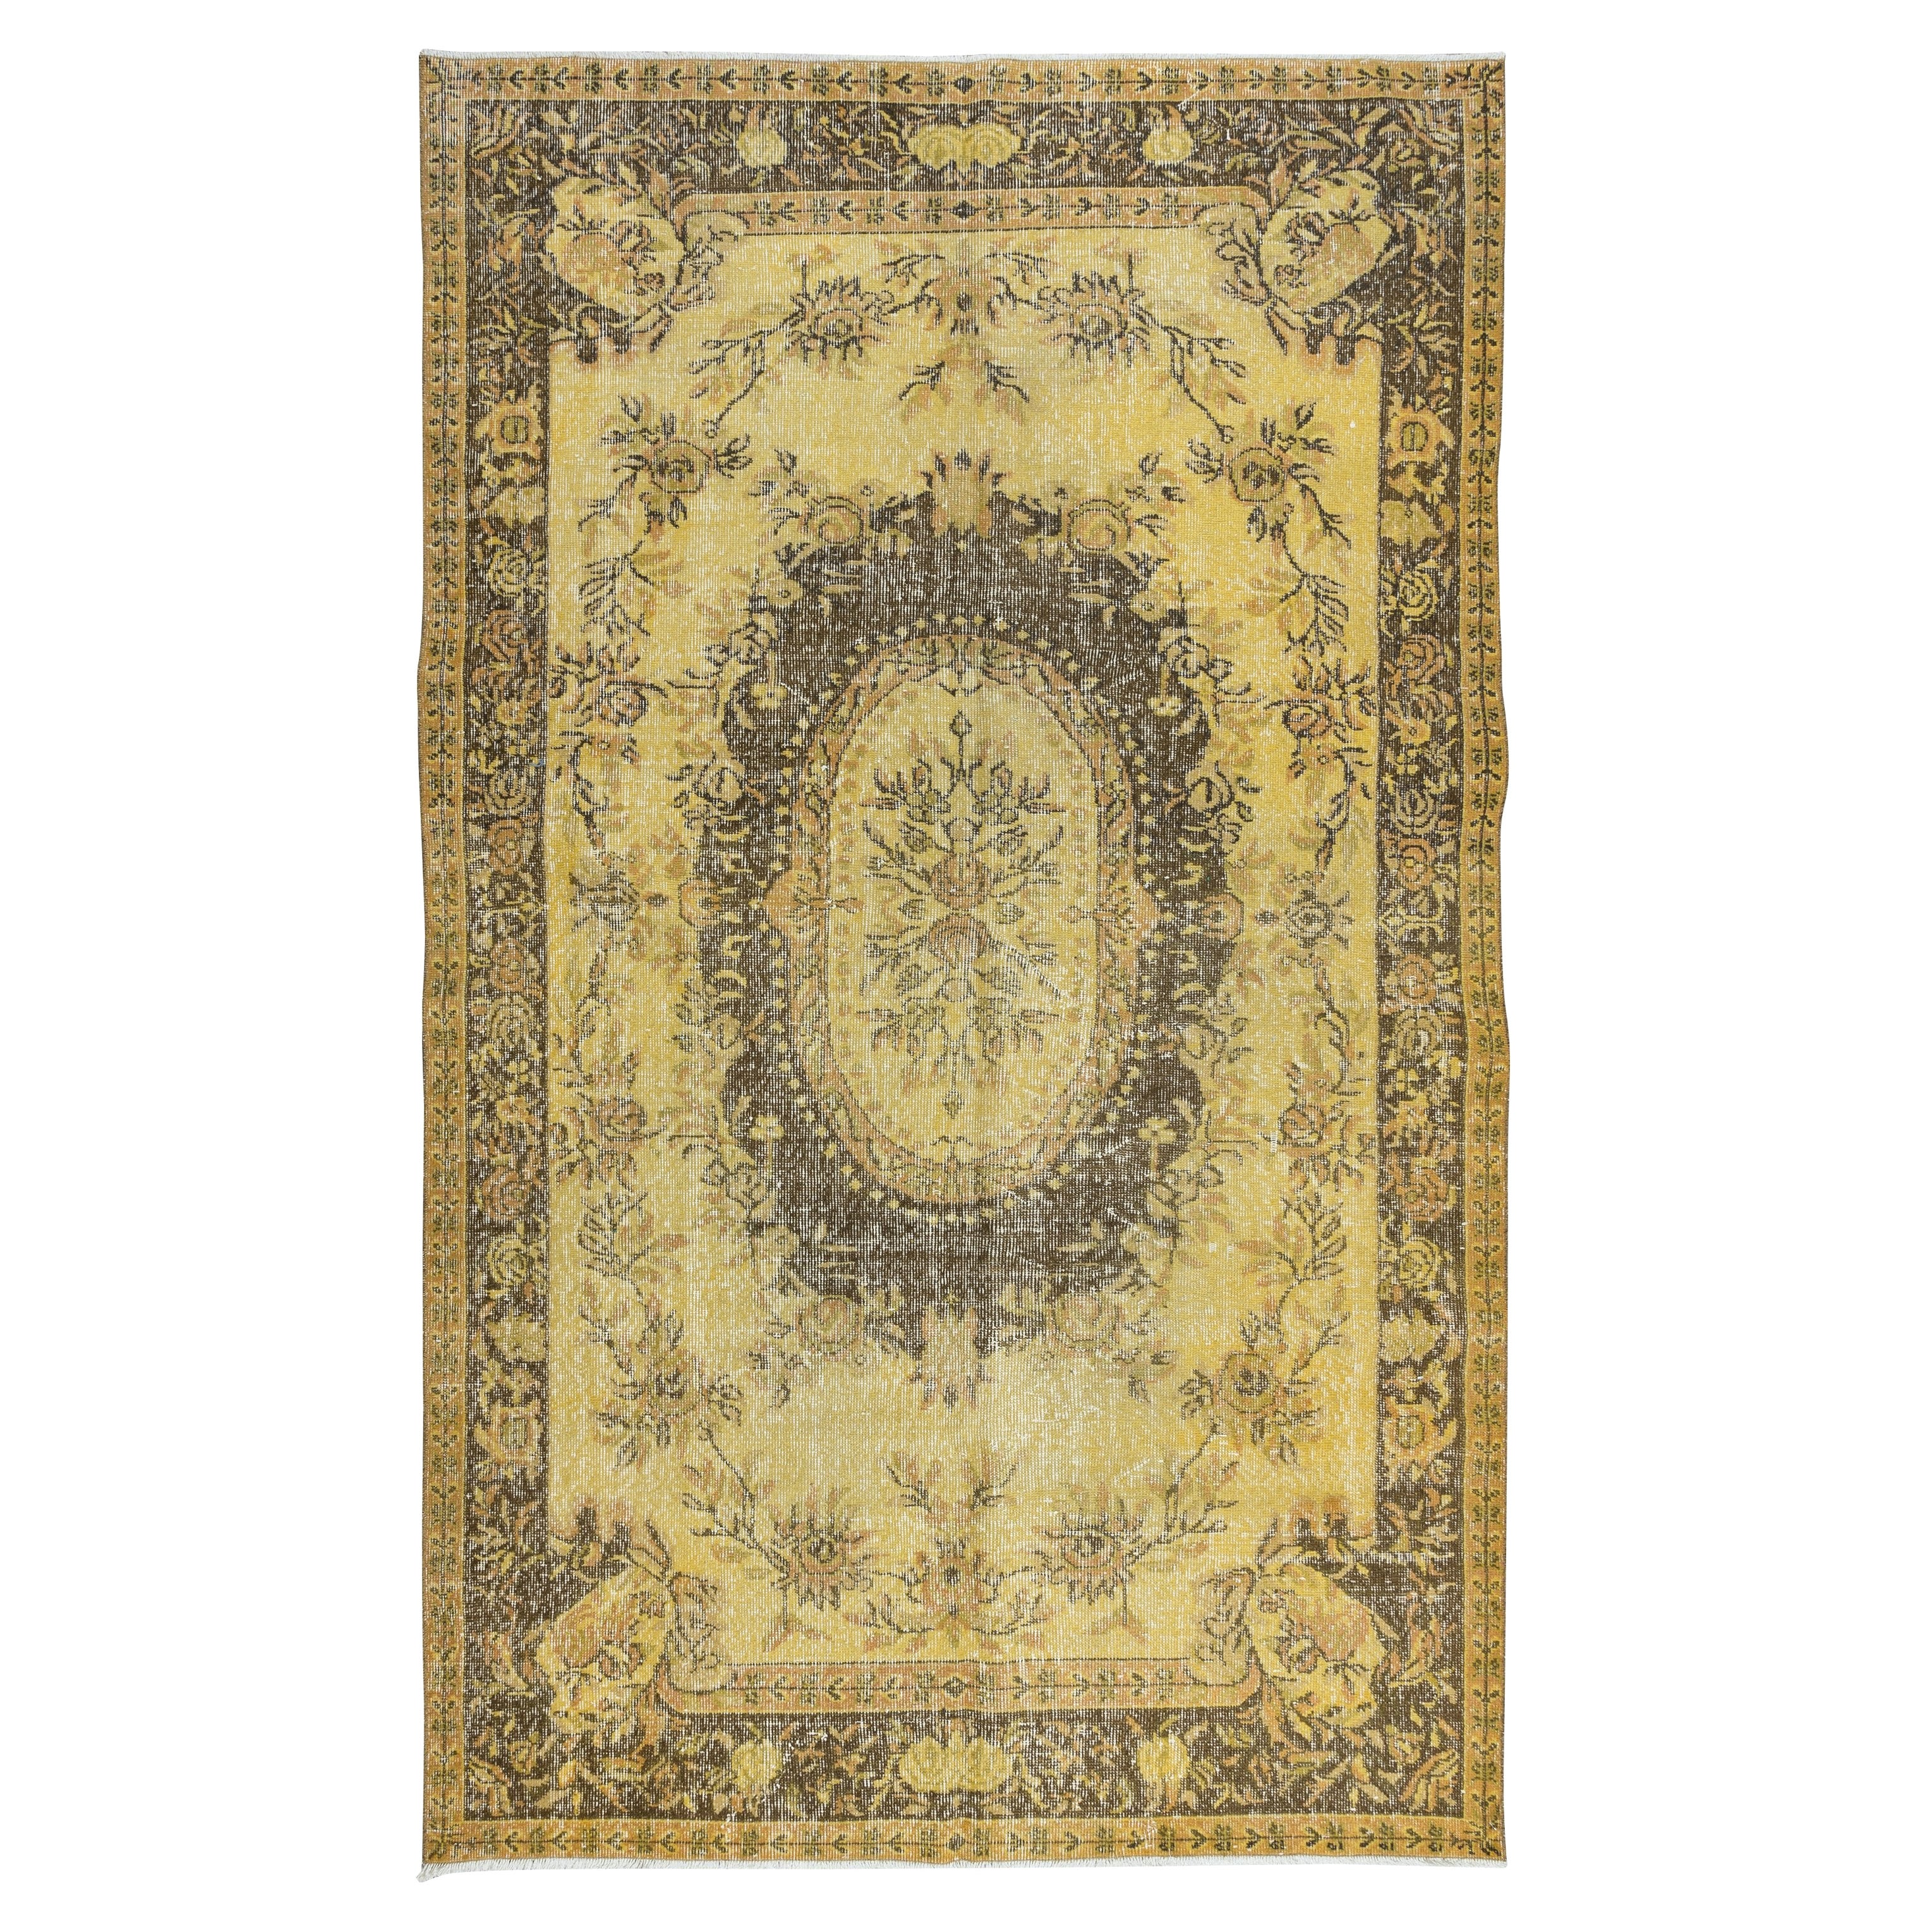 5.8x9.6 Ft Classic Aubusson Inspired Handmade Turkish Rug in Soft Yellow & Brown (Tapis turc classique d'inspiration Aubusson, jaune et brun)